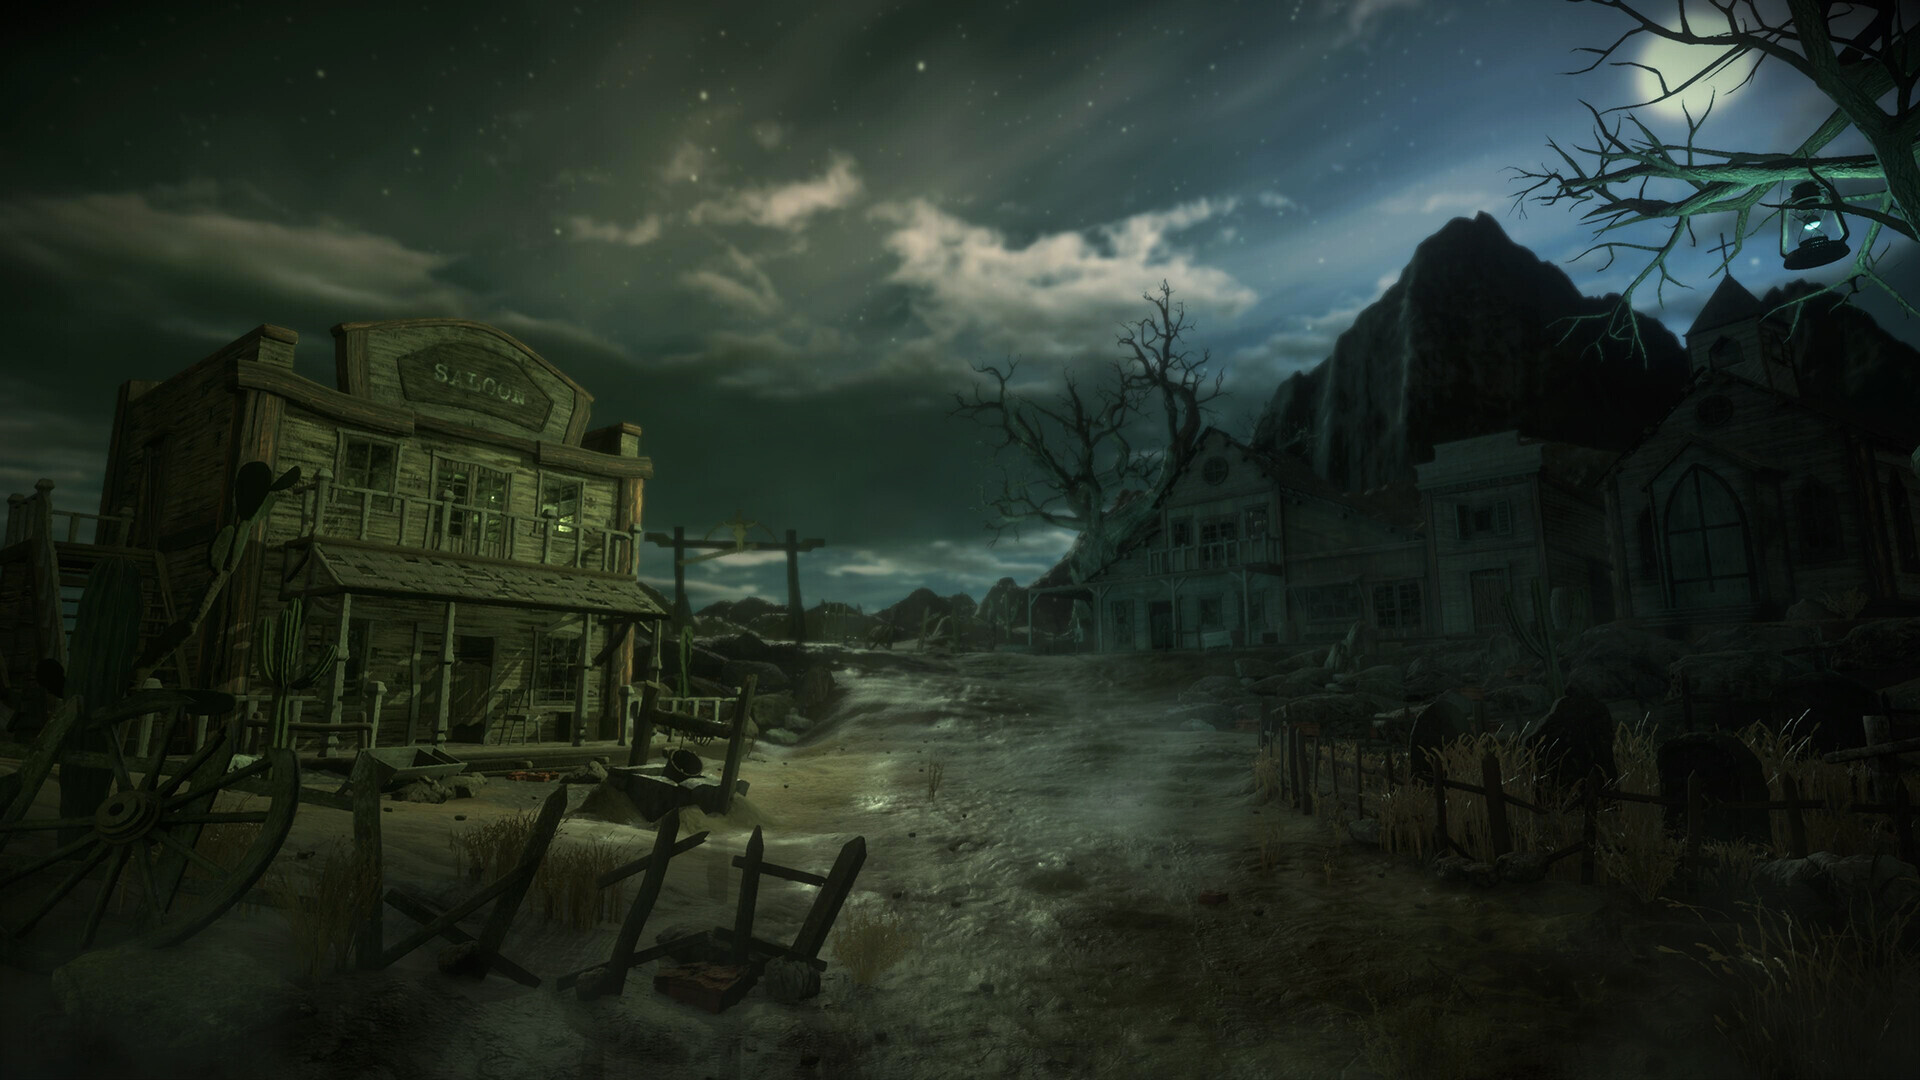 Ghost Town: Haunted place with a mysterious and mystical atmosphere. 1920x1080 Full HD Wallpaper.